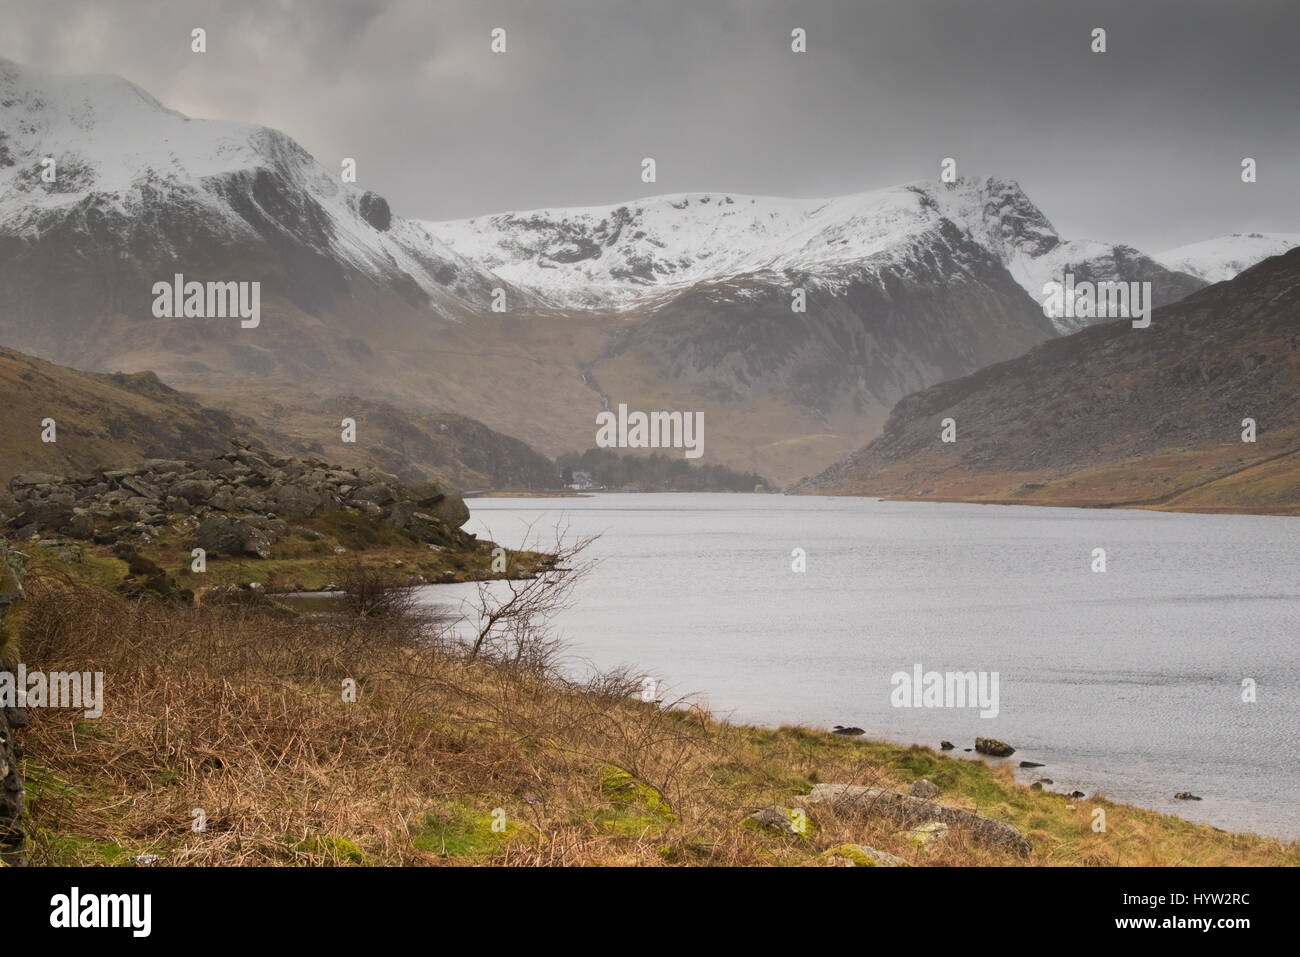 Llyn Ogwen on a rainy day in winter, Snowdonia National Park, Wales Stock Photo